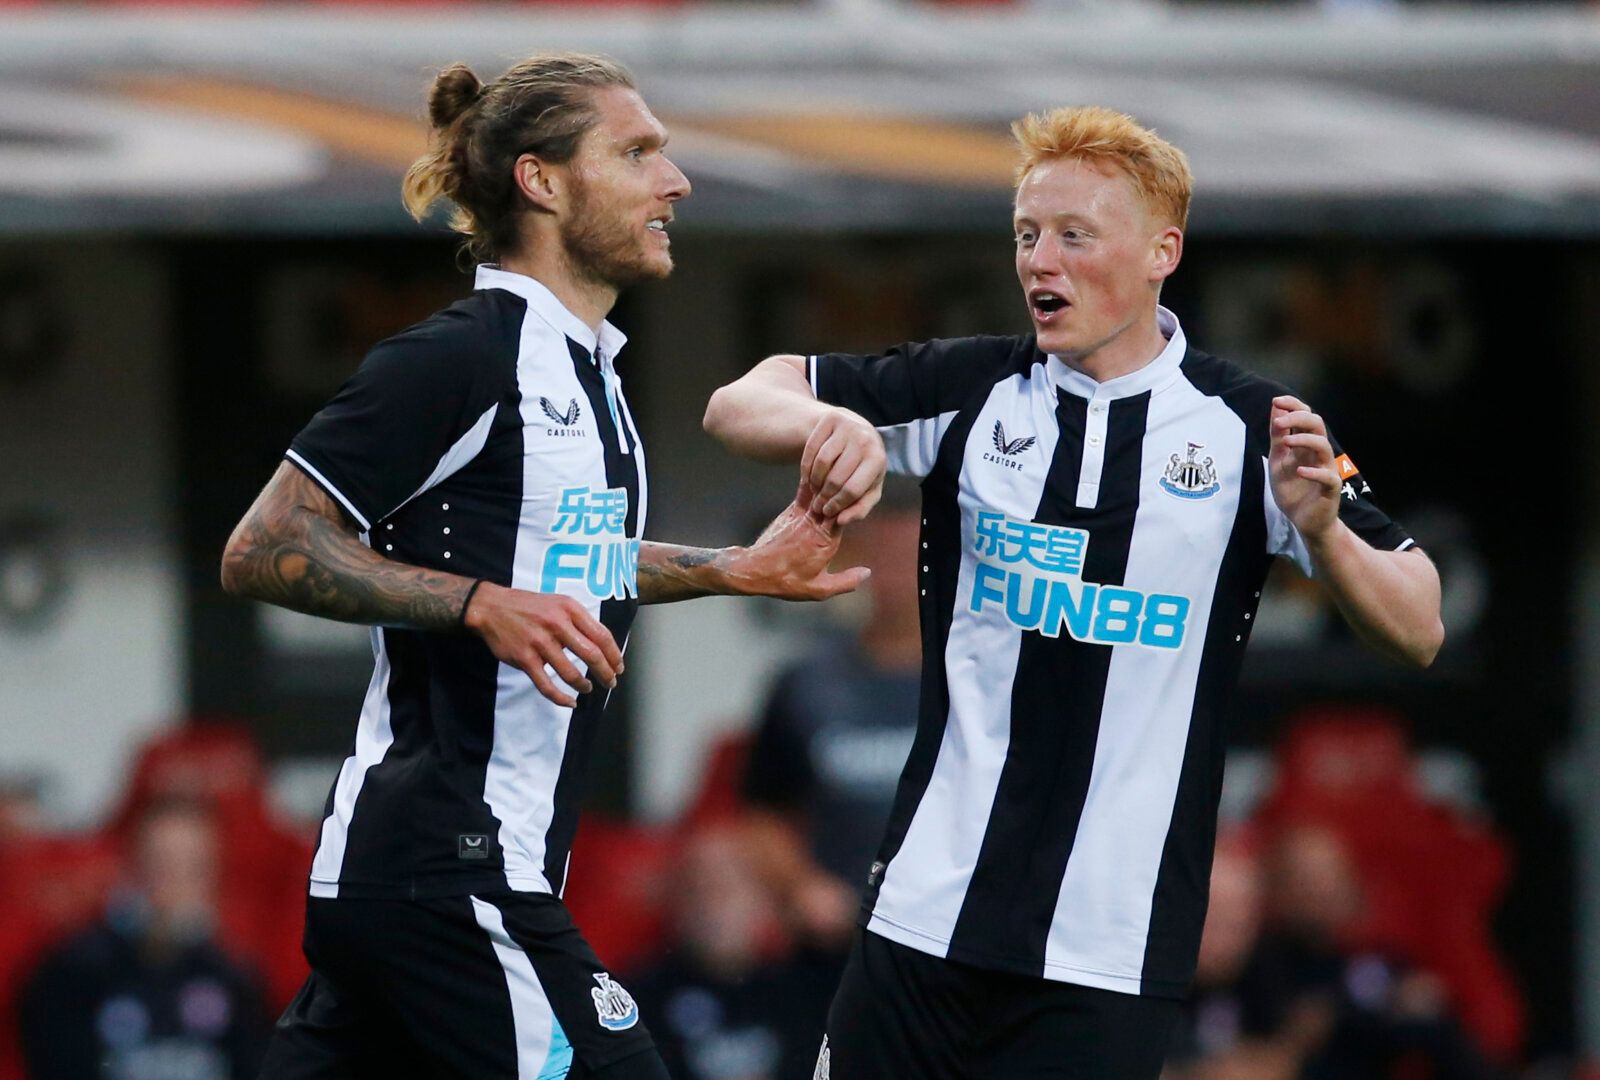 Soccer Football - Pre Season Friendly - Rotherham United v Newcastle United - AESSEAL New York Stadium, Rotherham, Britain - July 27, 2021 Newcastle United's Jeff Hendrick celebrates scoring their first goal with Matty Longstaff Action Images via Reuters/Ed Sykes